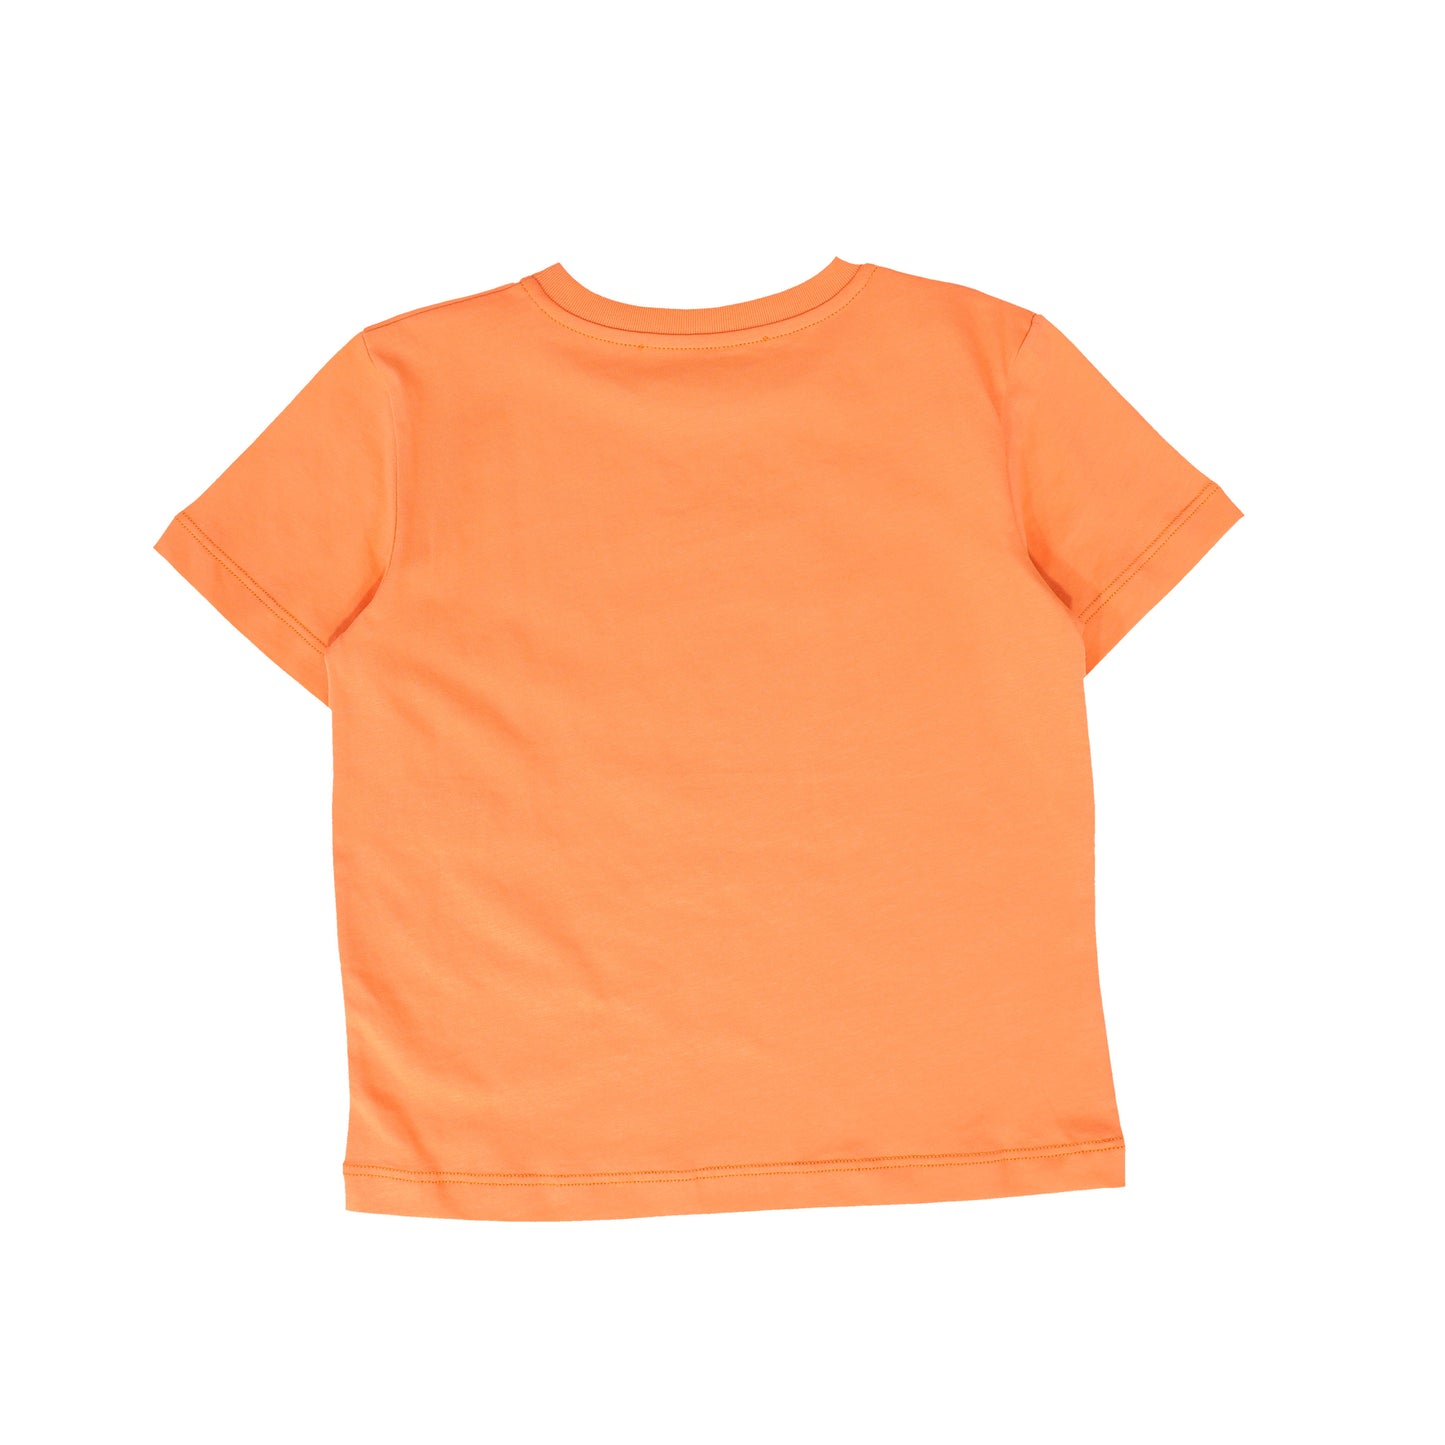 BE FOR ALL ORANGE WORDED TEE